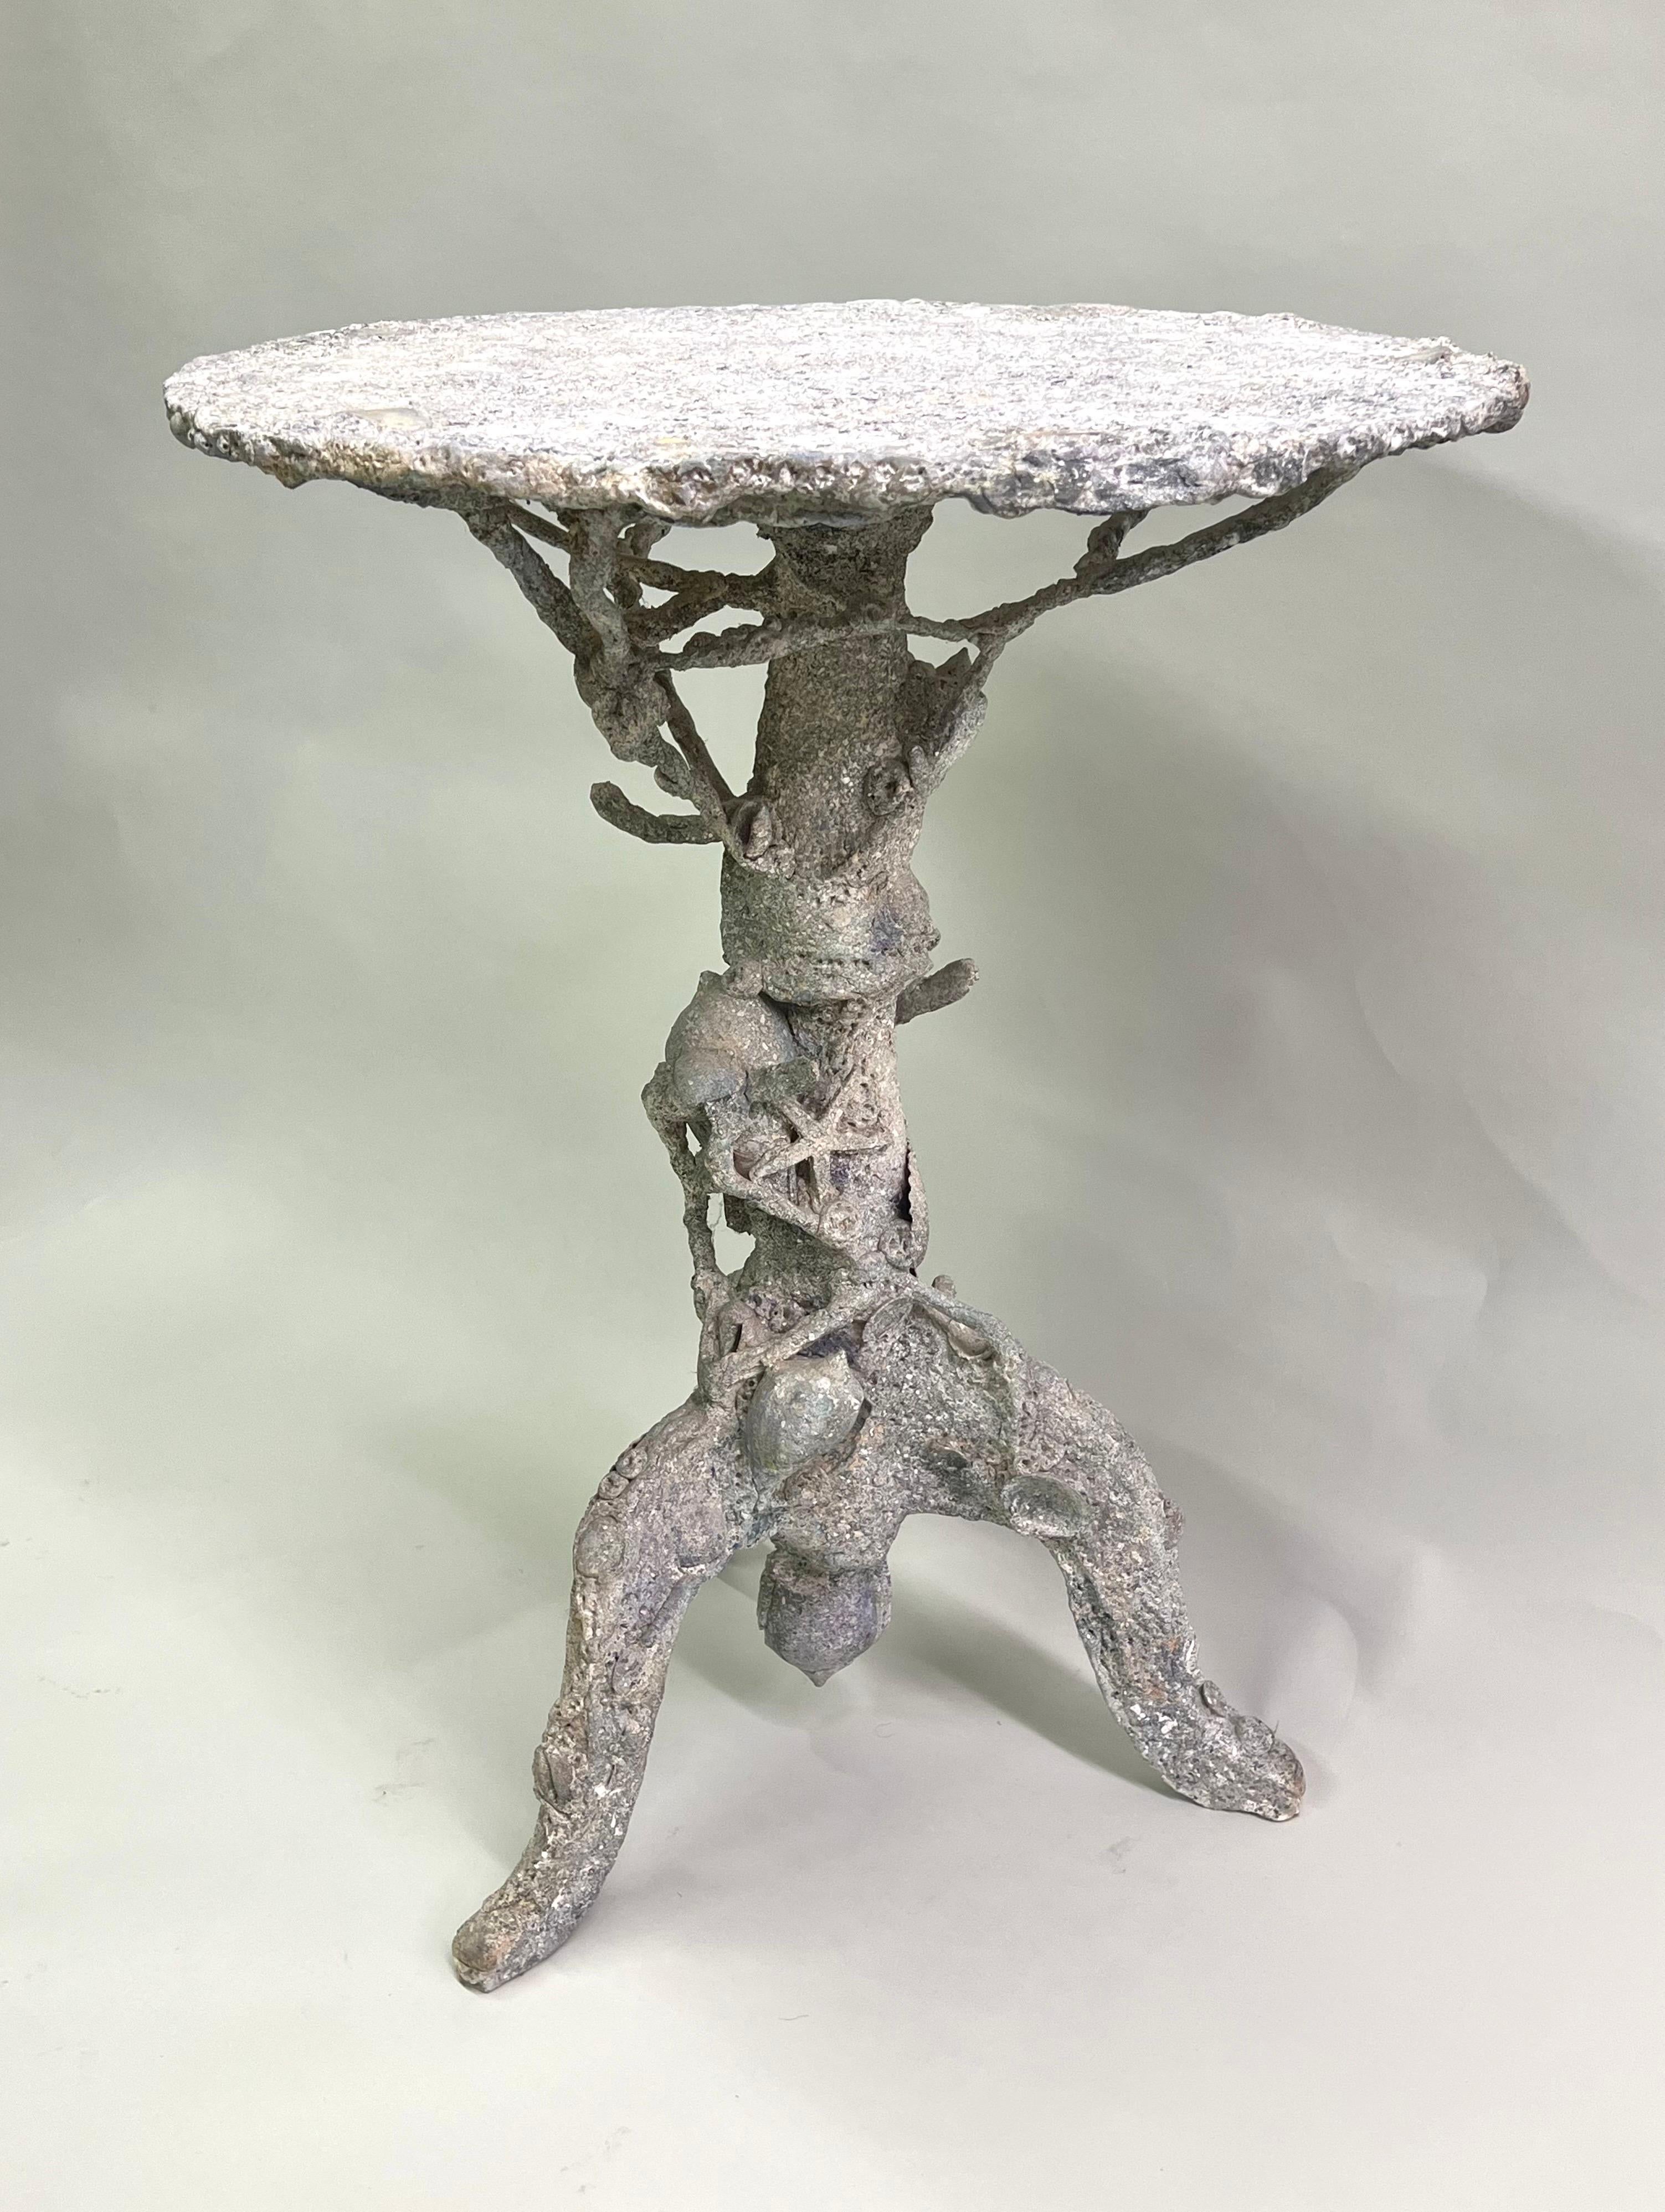 A Rare and Important French Grotto Side or End Table or Gueridon by Serge Roche for Maison Jansen, France, circa 1940. This hand made, mid-century piece was part of a suite of pieces designed for an exclusive private residence by Maison Jansen and